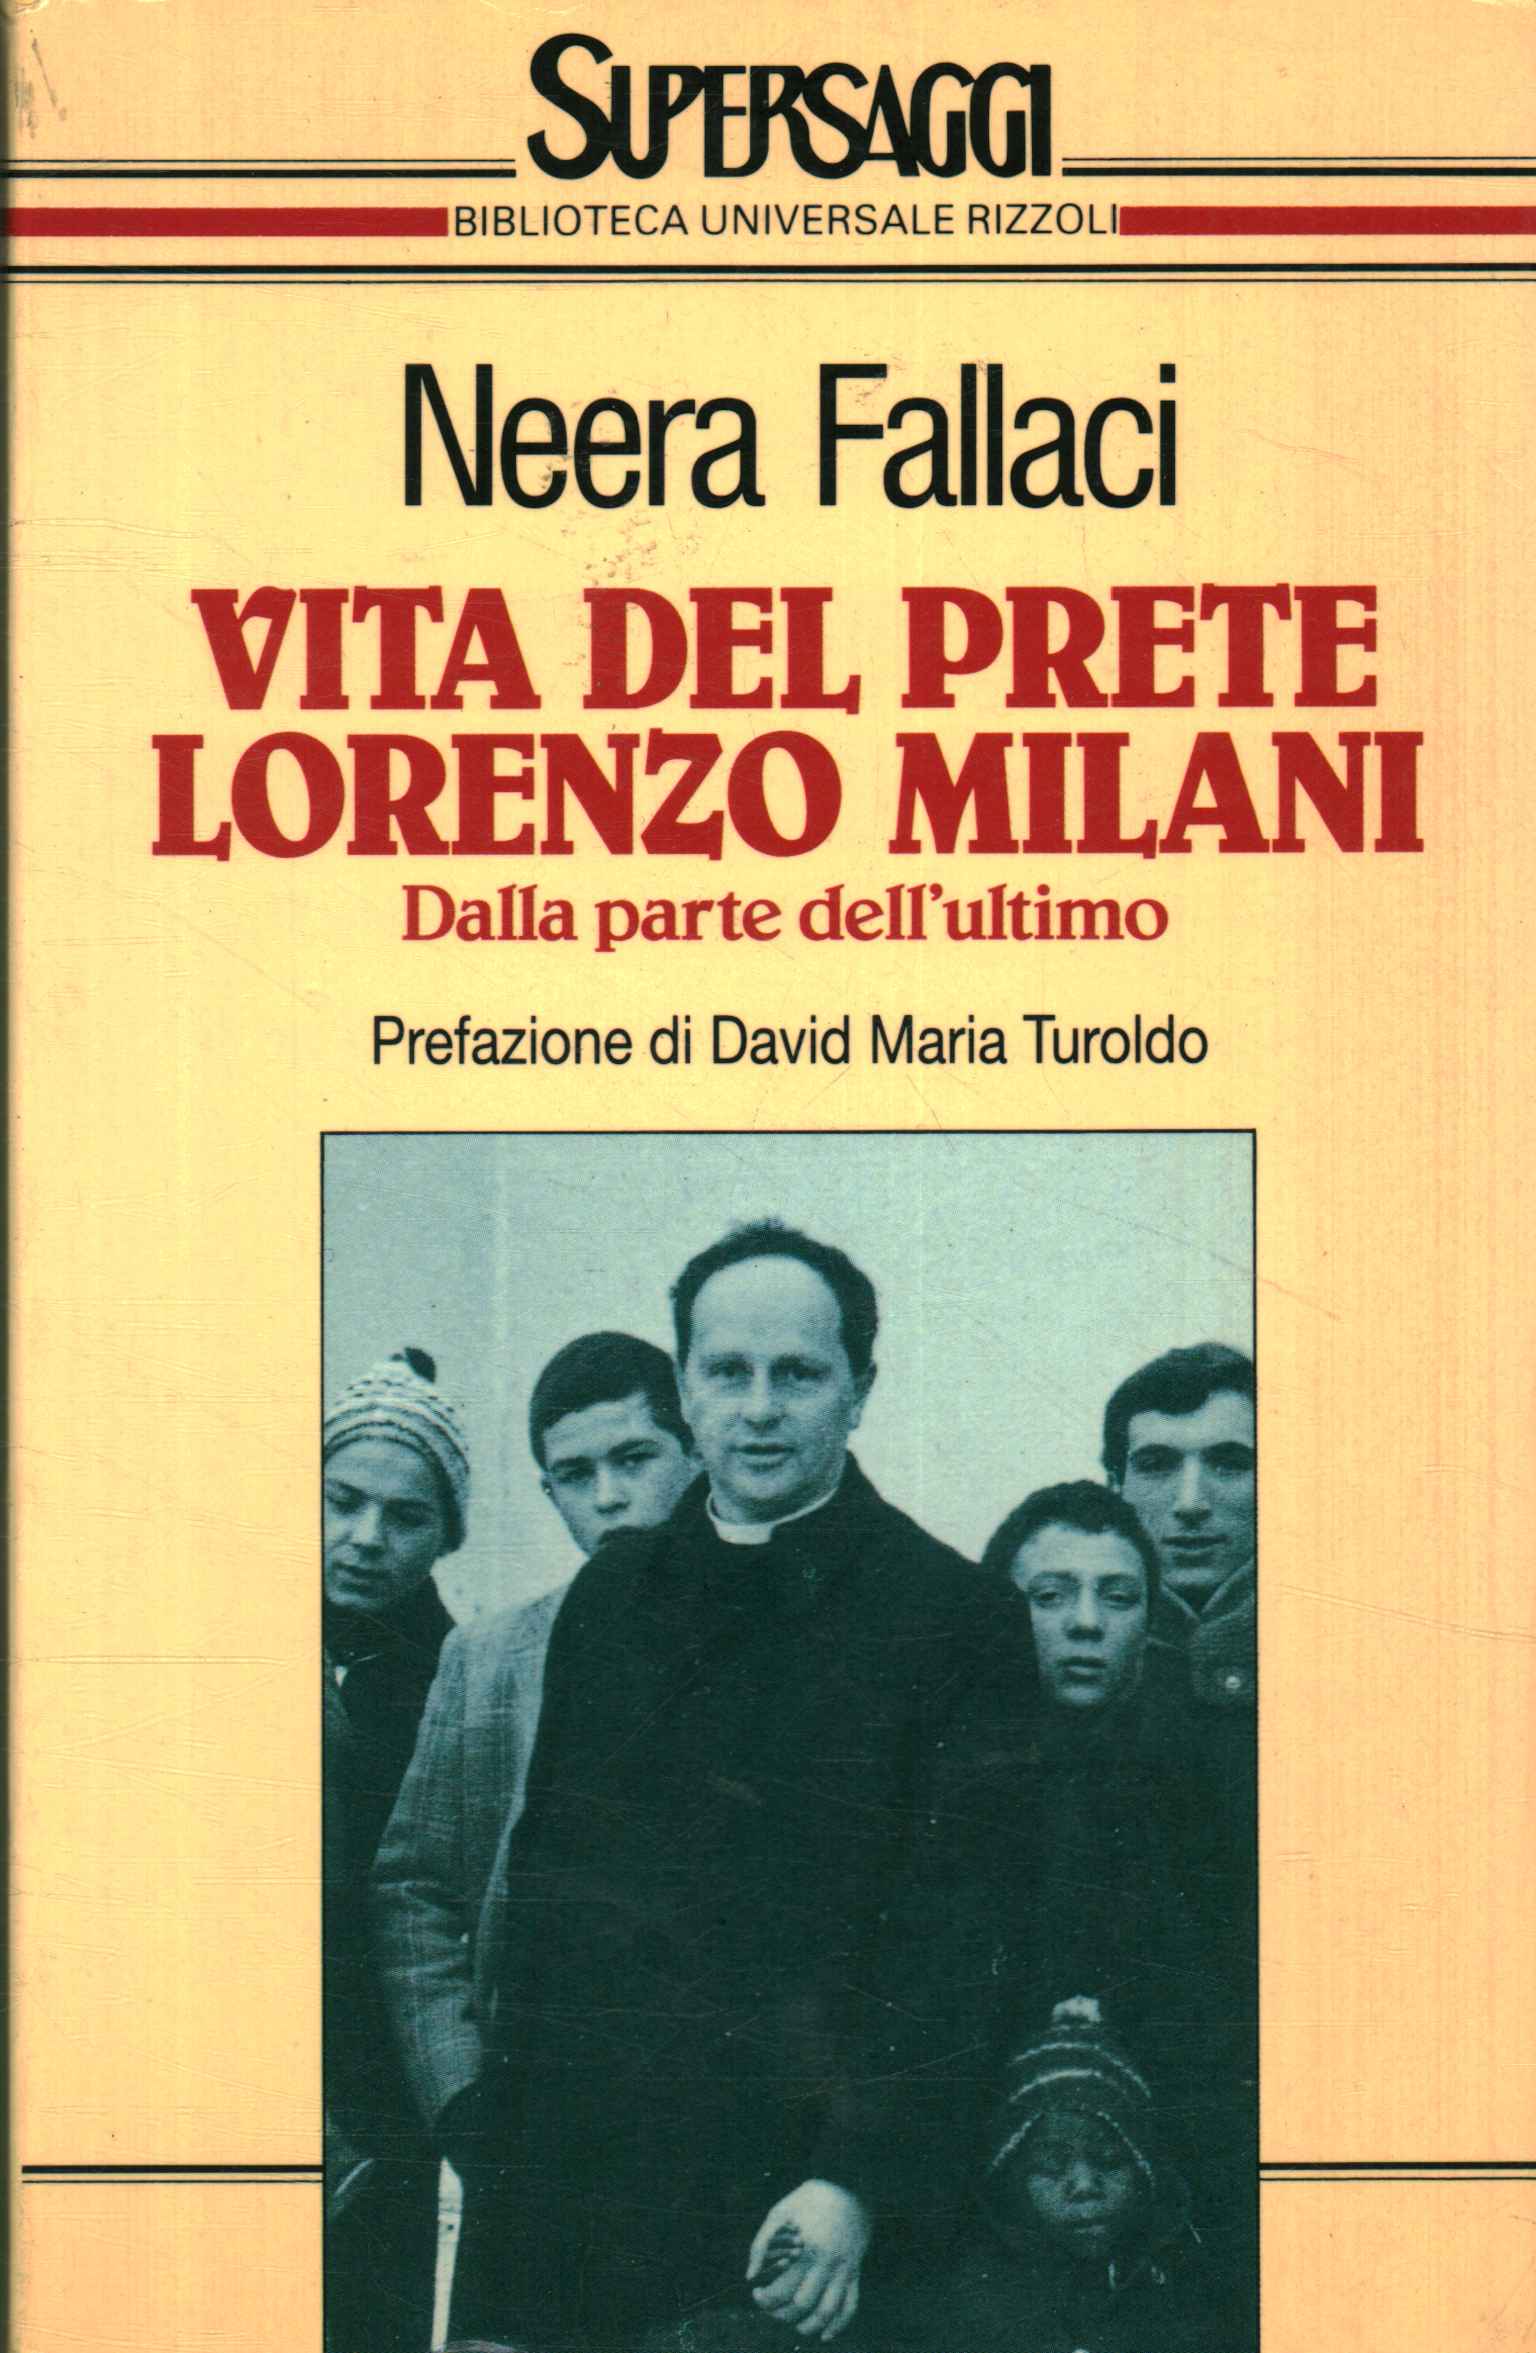 Life of the priest Lorenzo Milani. From p